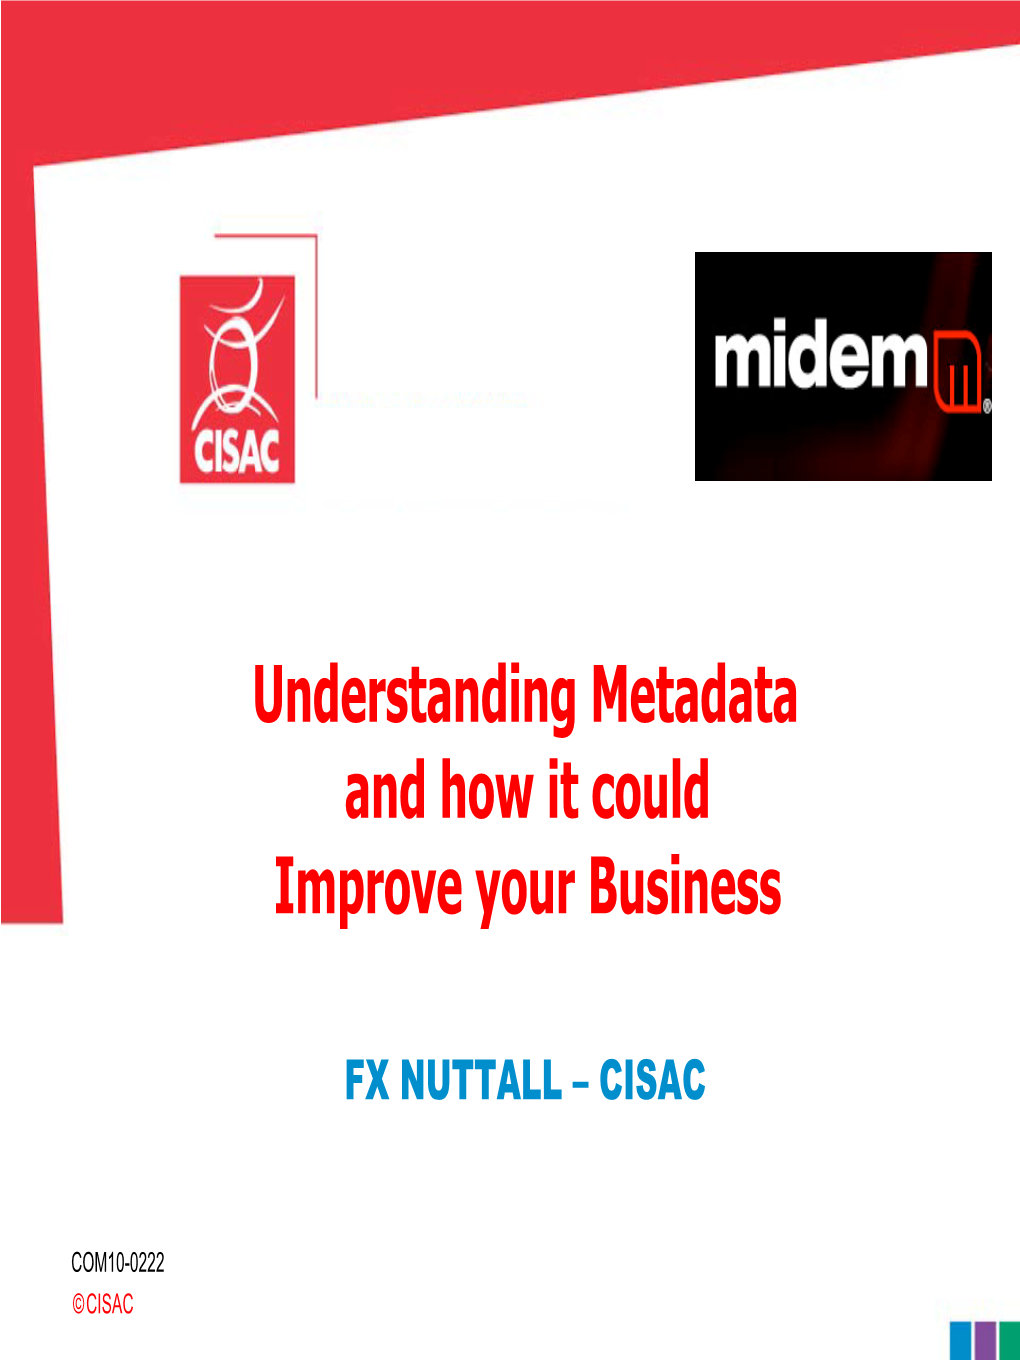 Understanding Metadata and How It Could Improve Your Business